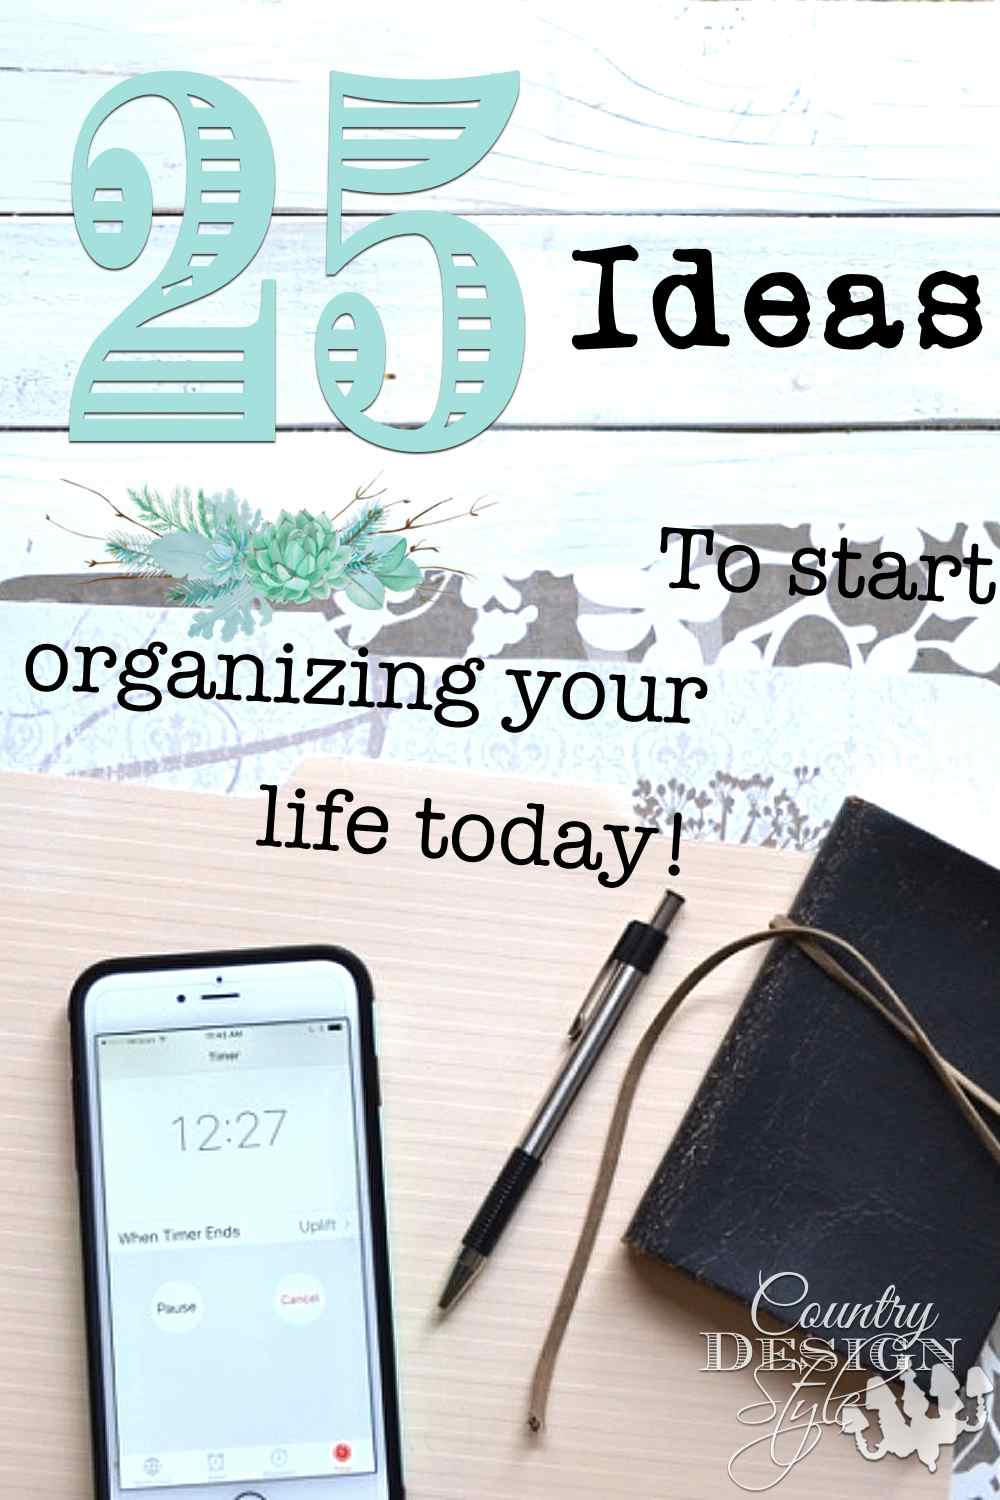 25 things to start Organizing today Pin | Country Design Style | countrydesignstyle.com